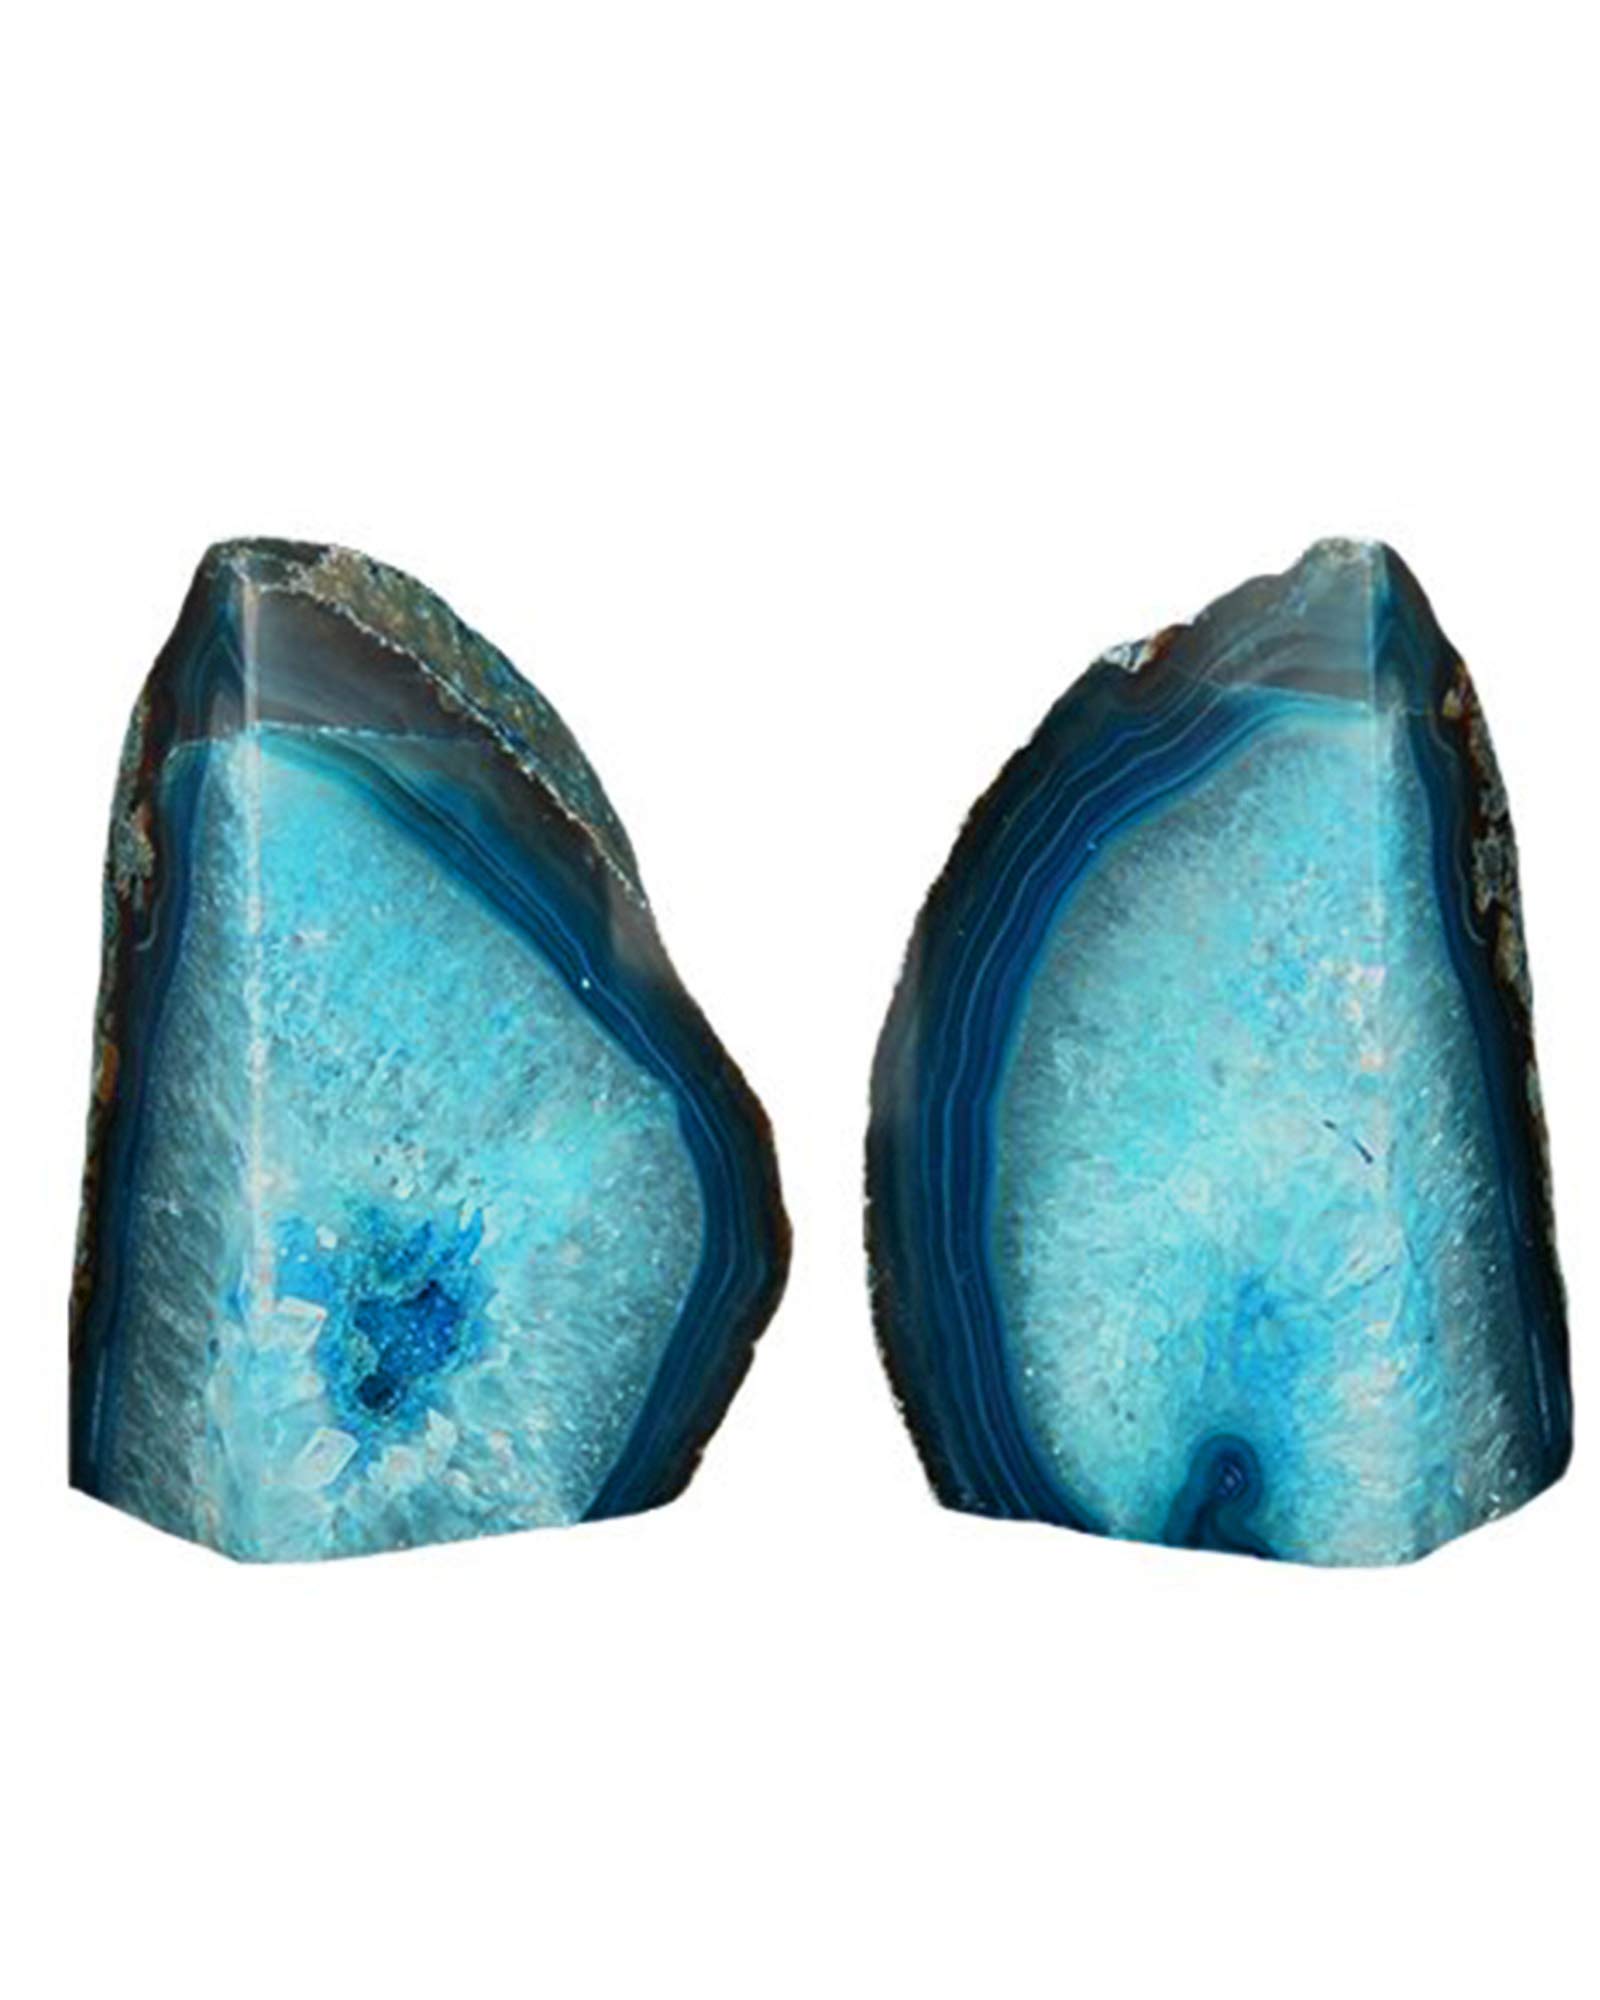 AMOYSTONE Teal / Green Agate Bookends Heavy Book Ends 1 Pair Large Stone Bookends 6-8 LBS with Rubber Bumpers for Office Bookshelf